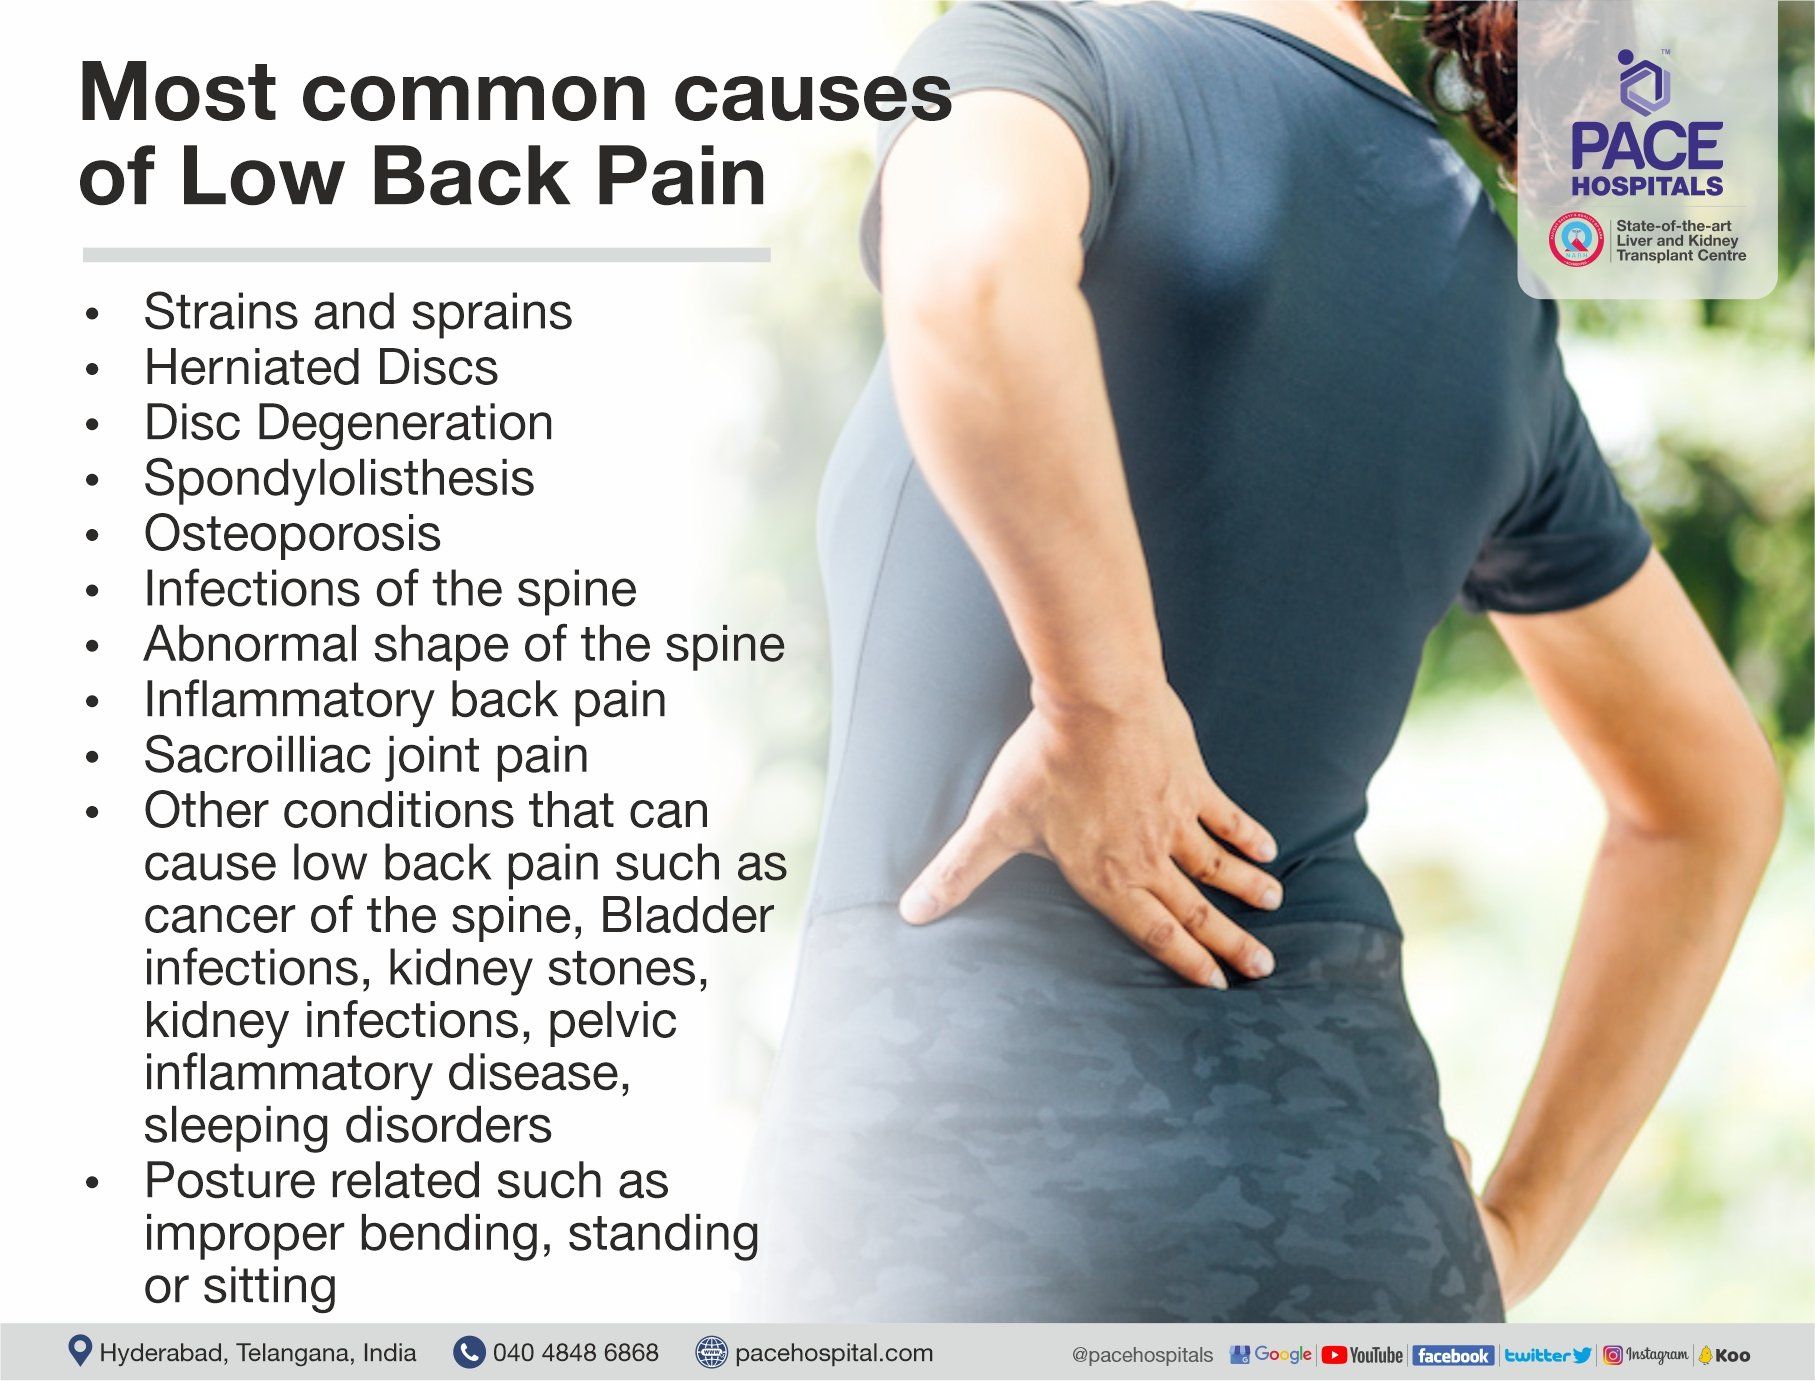 Most common causes of low back pain | Pace Hospitals